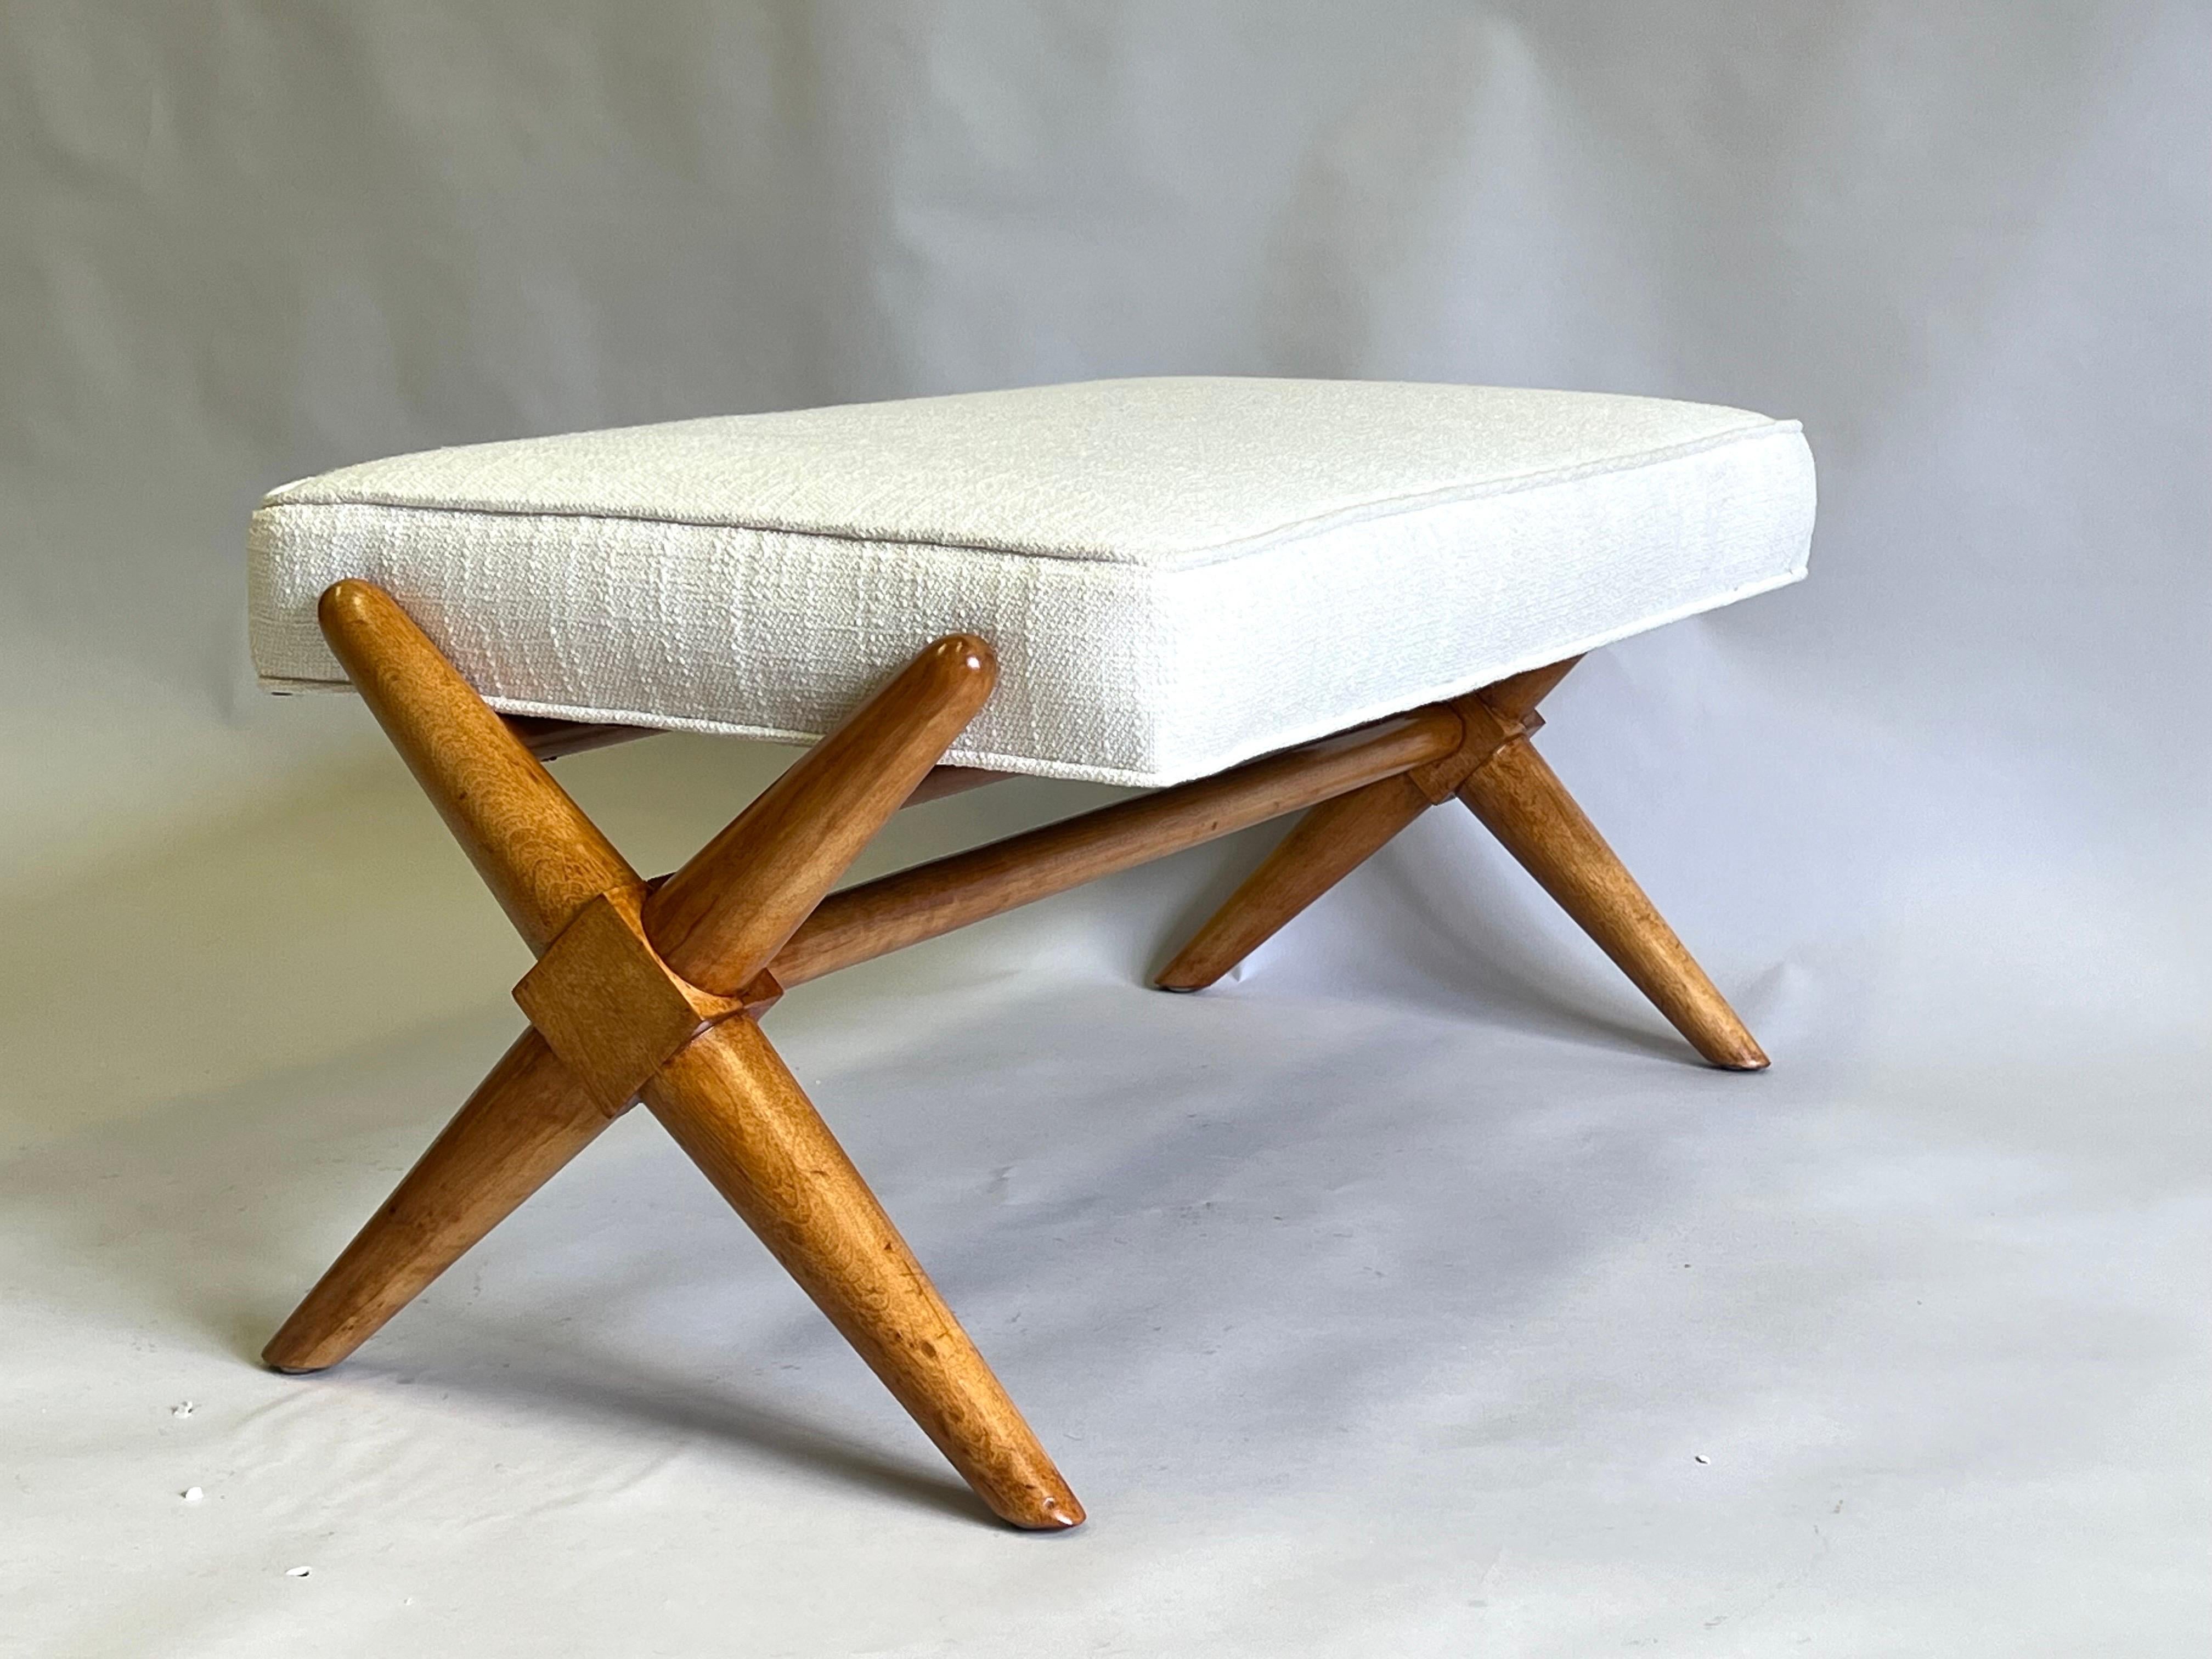 20th Century Mid-Century Modern Neoclassical Hardwood Bench in the style of Jean-Michel Frank For Sale